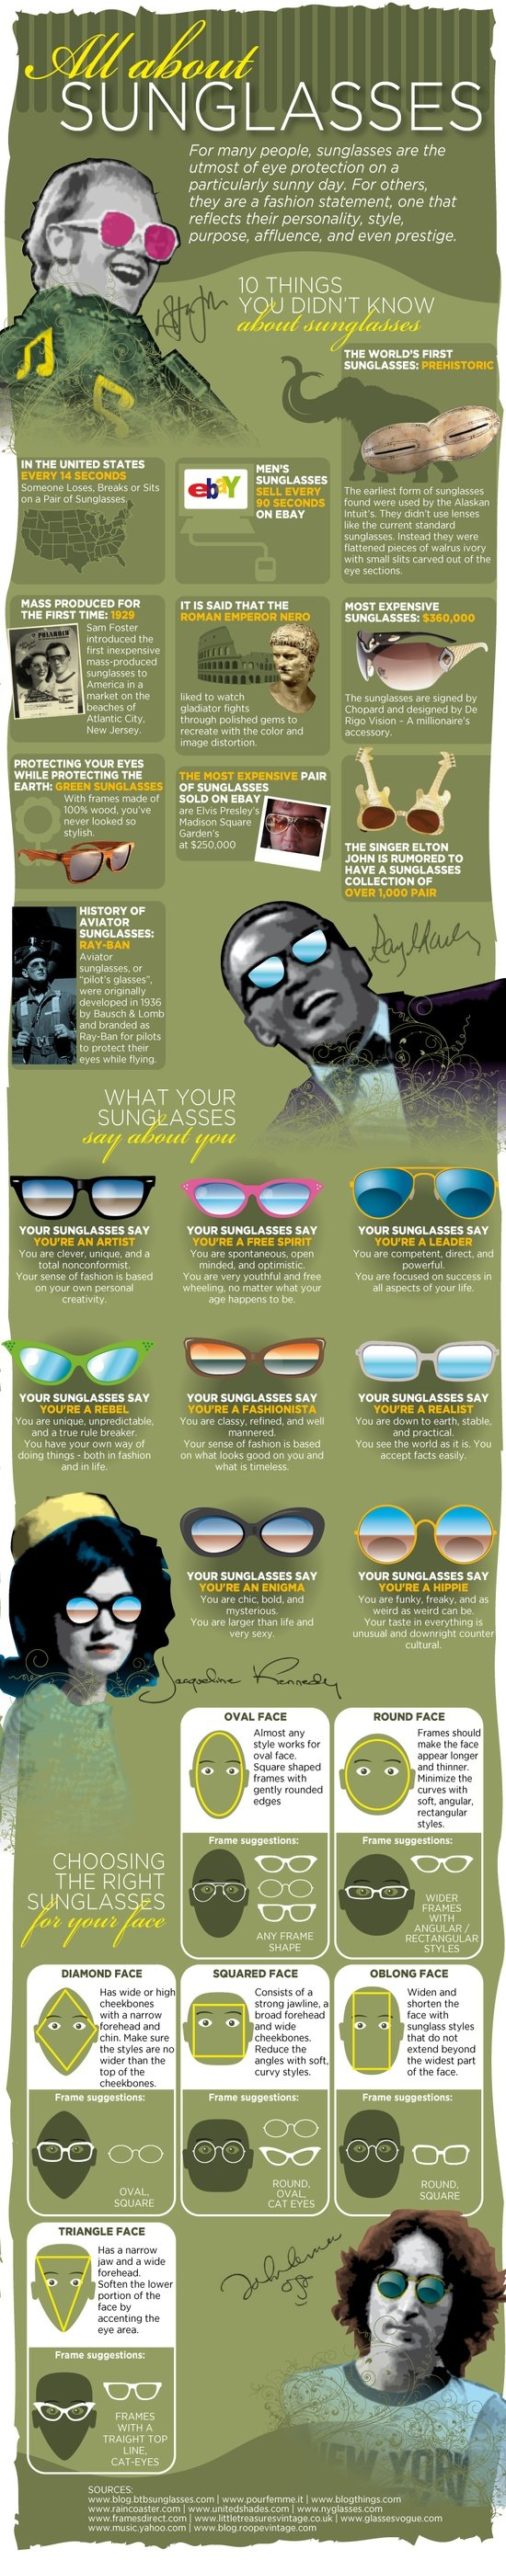 All About Sunglasses